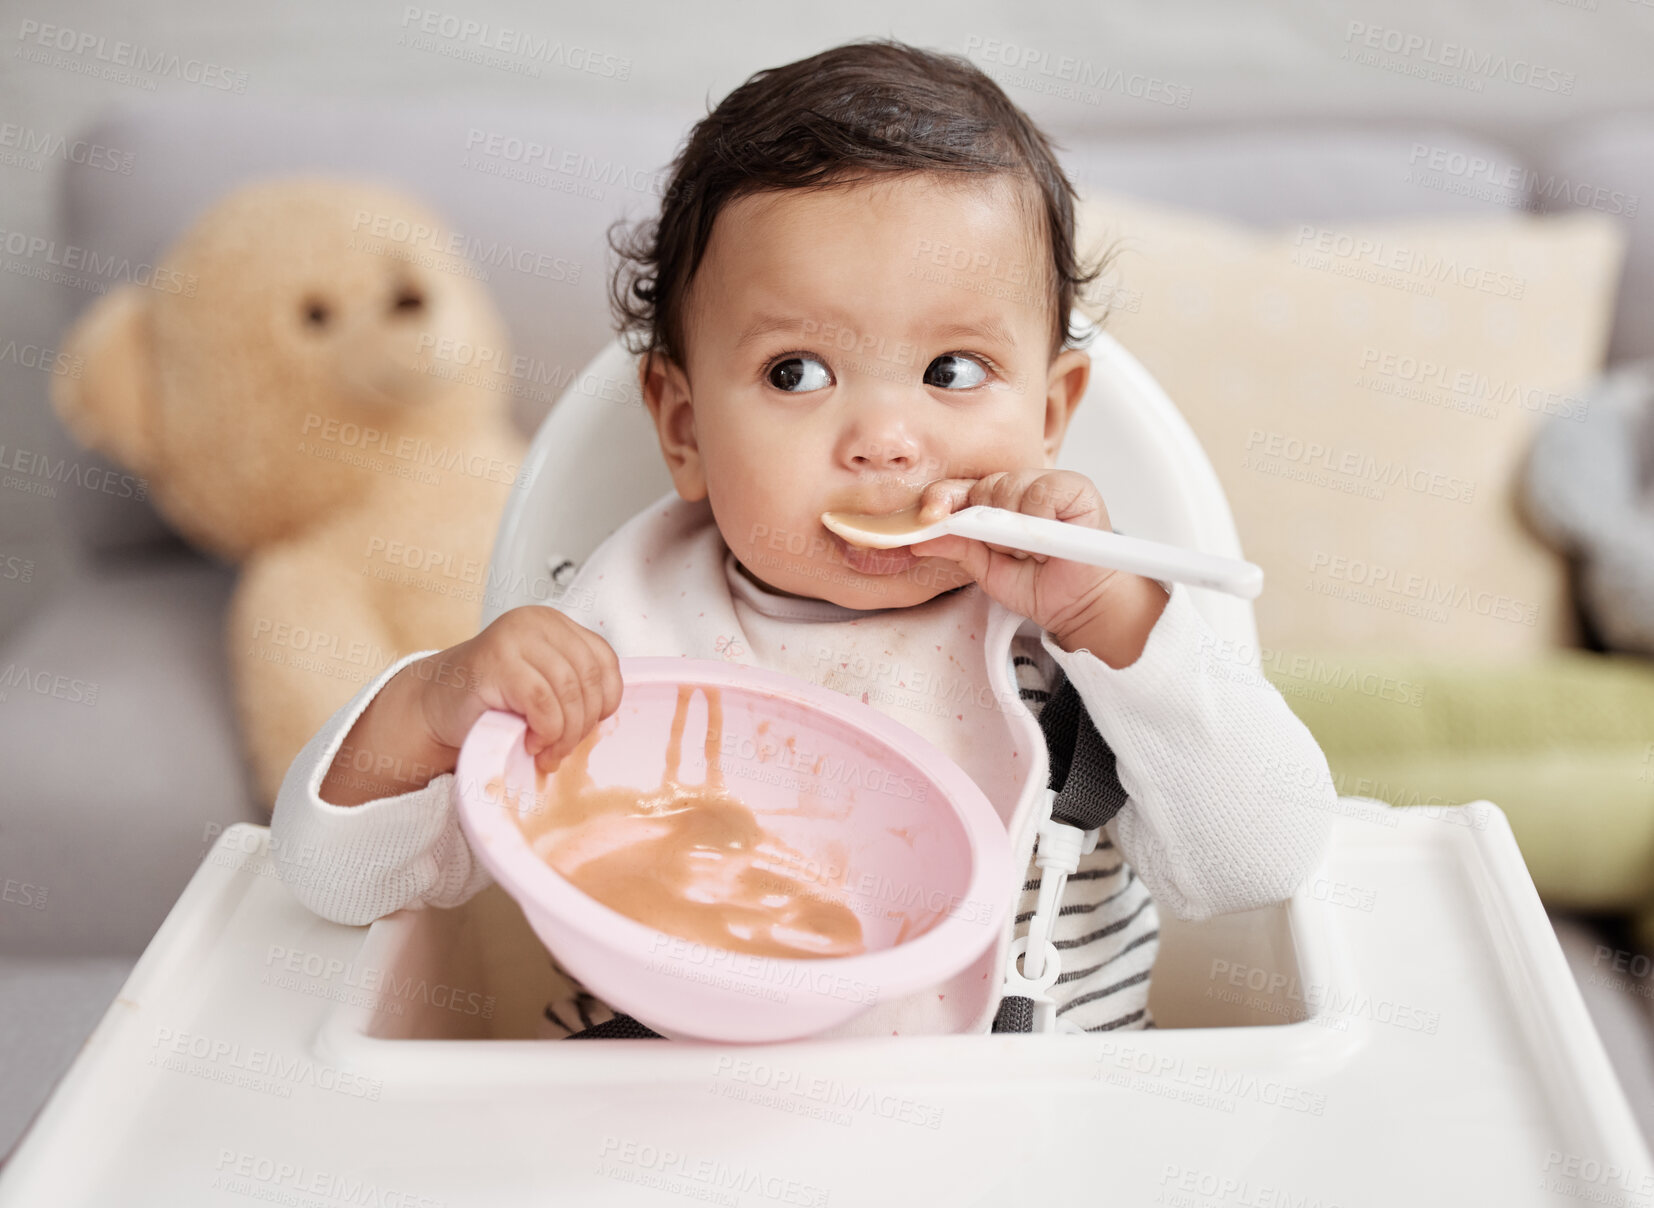 Buy stock photo High chair, food and baby eating in bowl for health, growth development and lunch or breakfast at home. Hungry newborn child or girl with healthy porridge, nutrition and spoon in mouth for learning